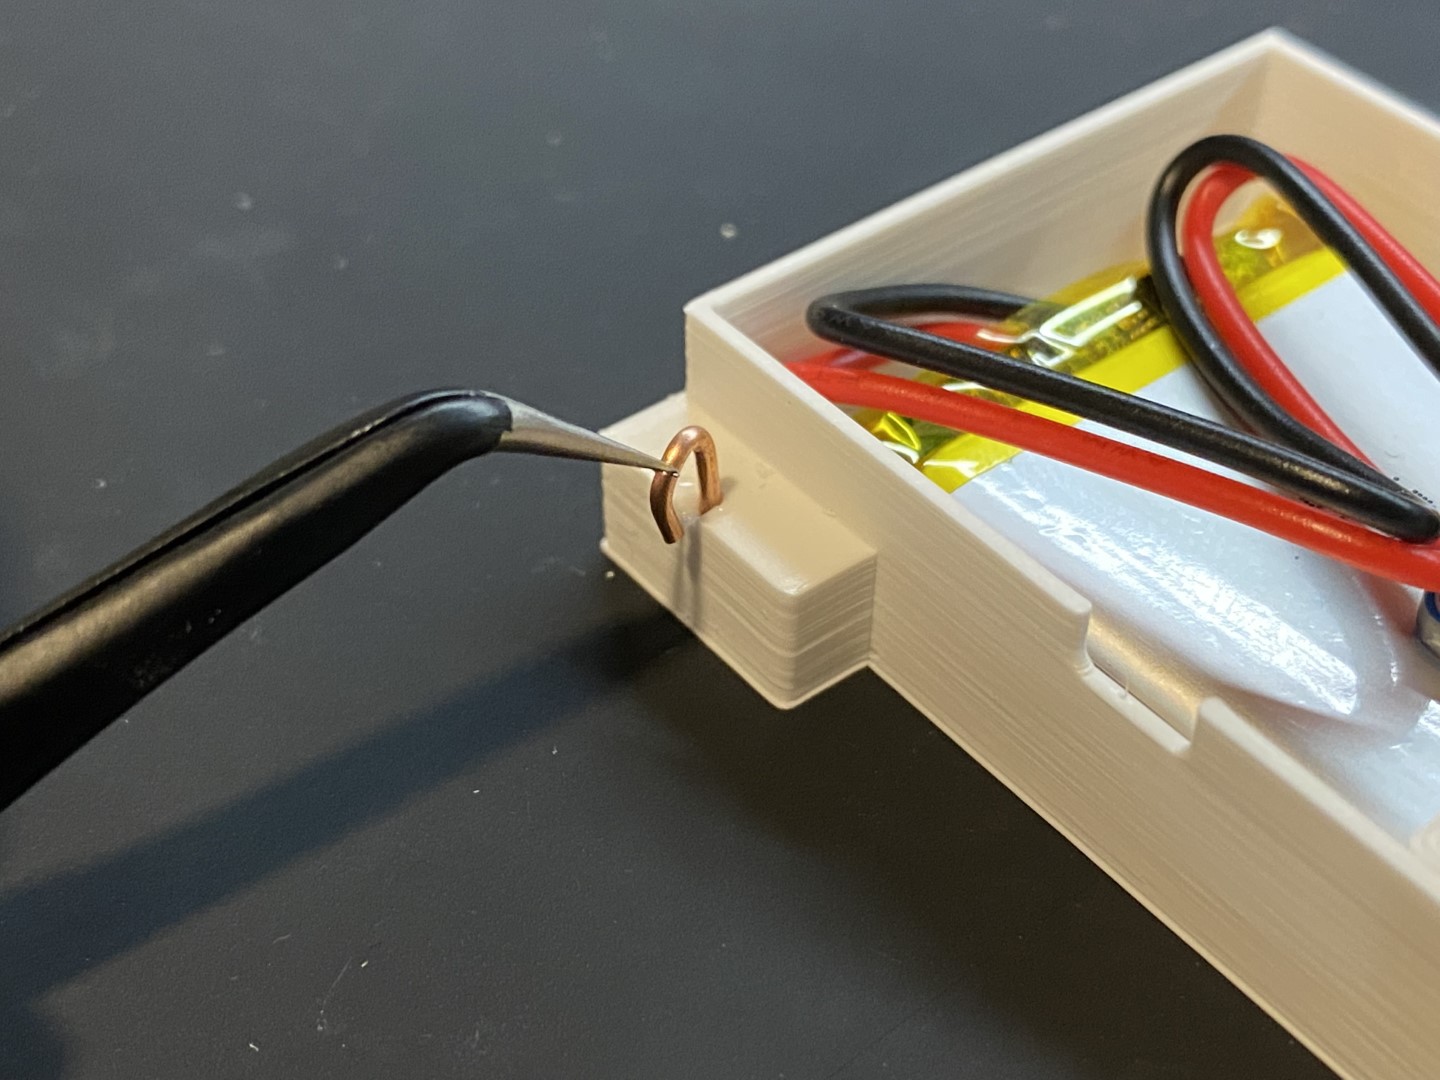 Wiring for the Gameboy LiPo Battery